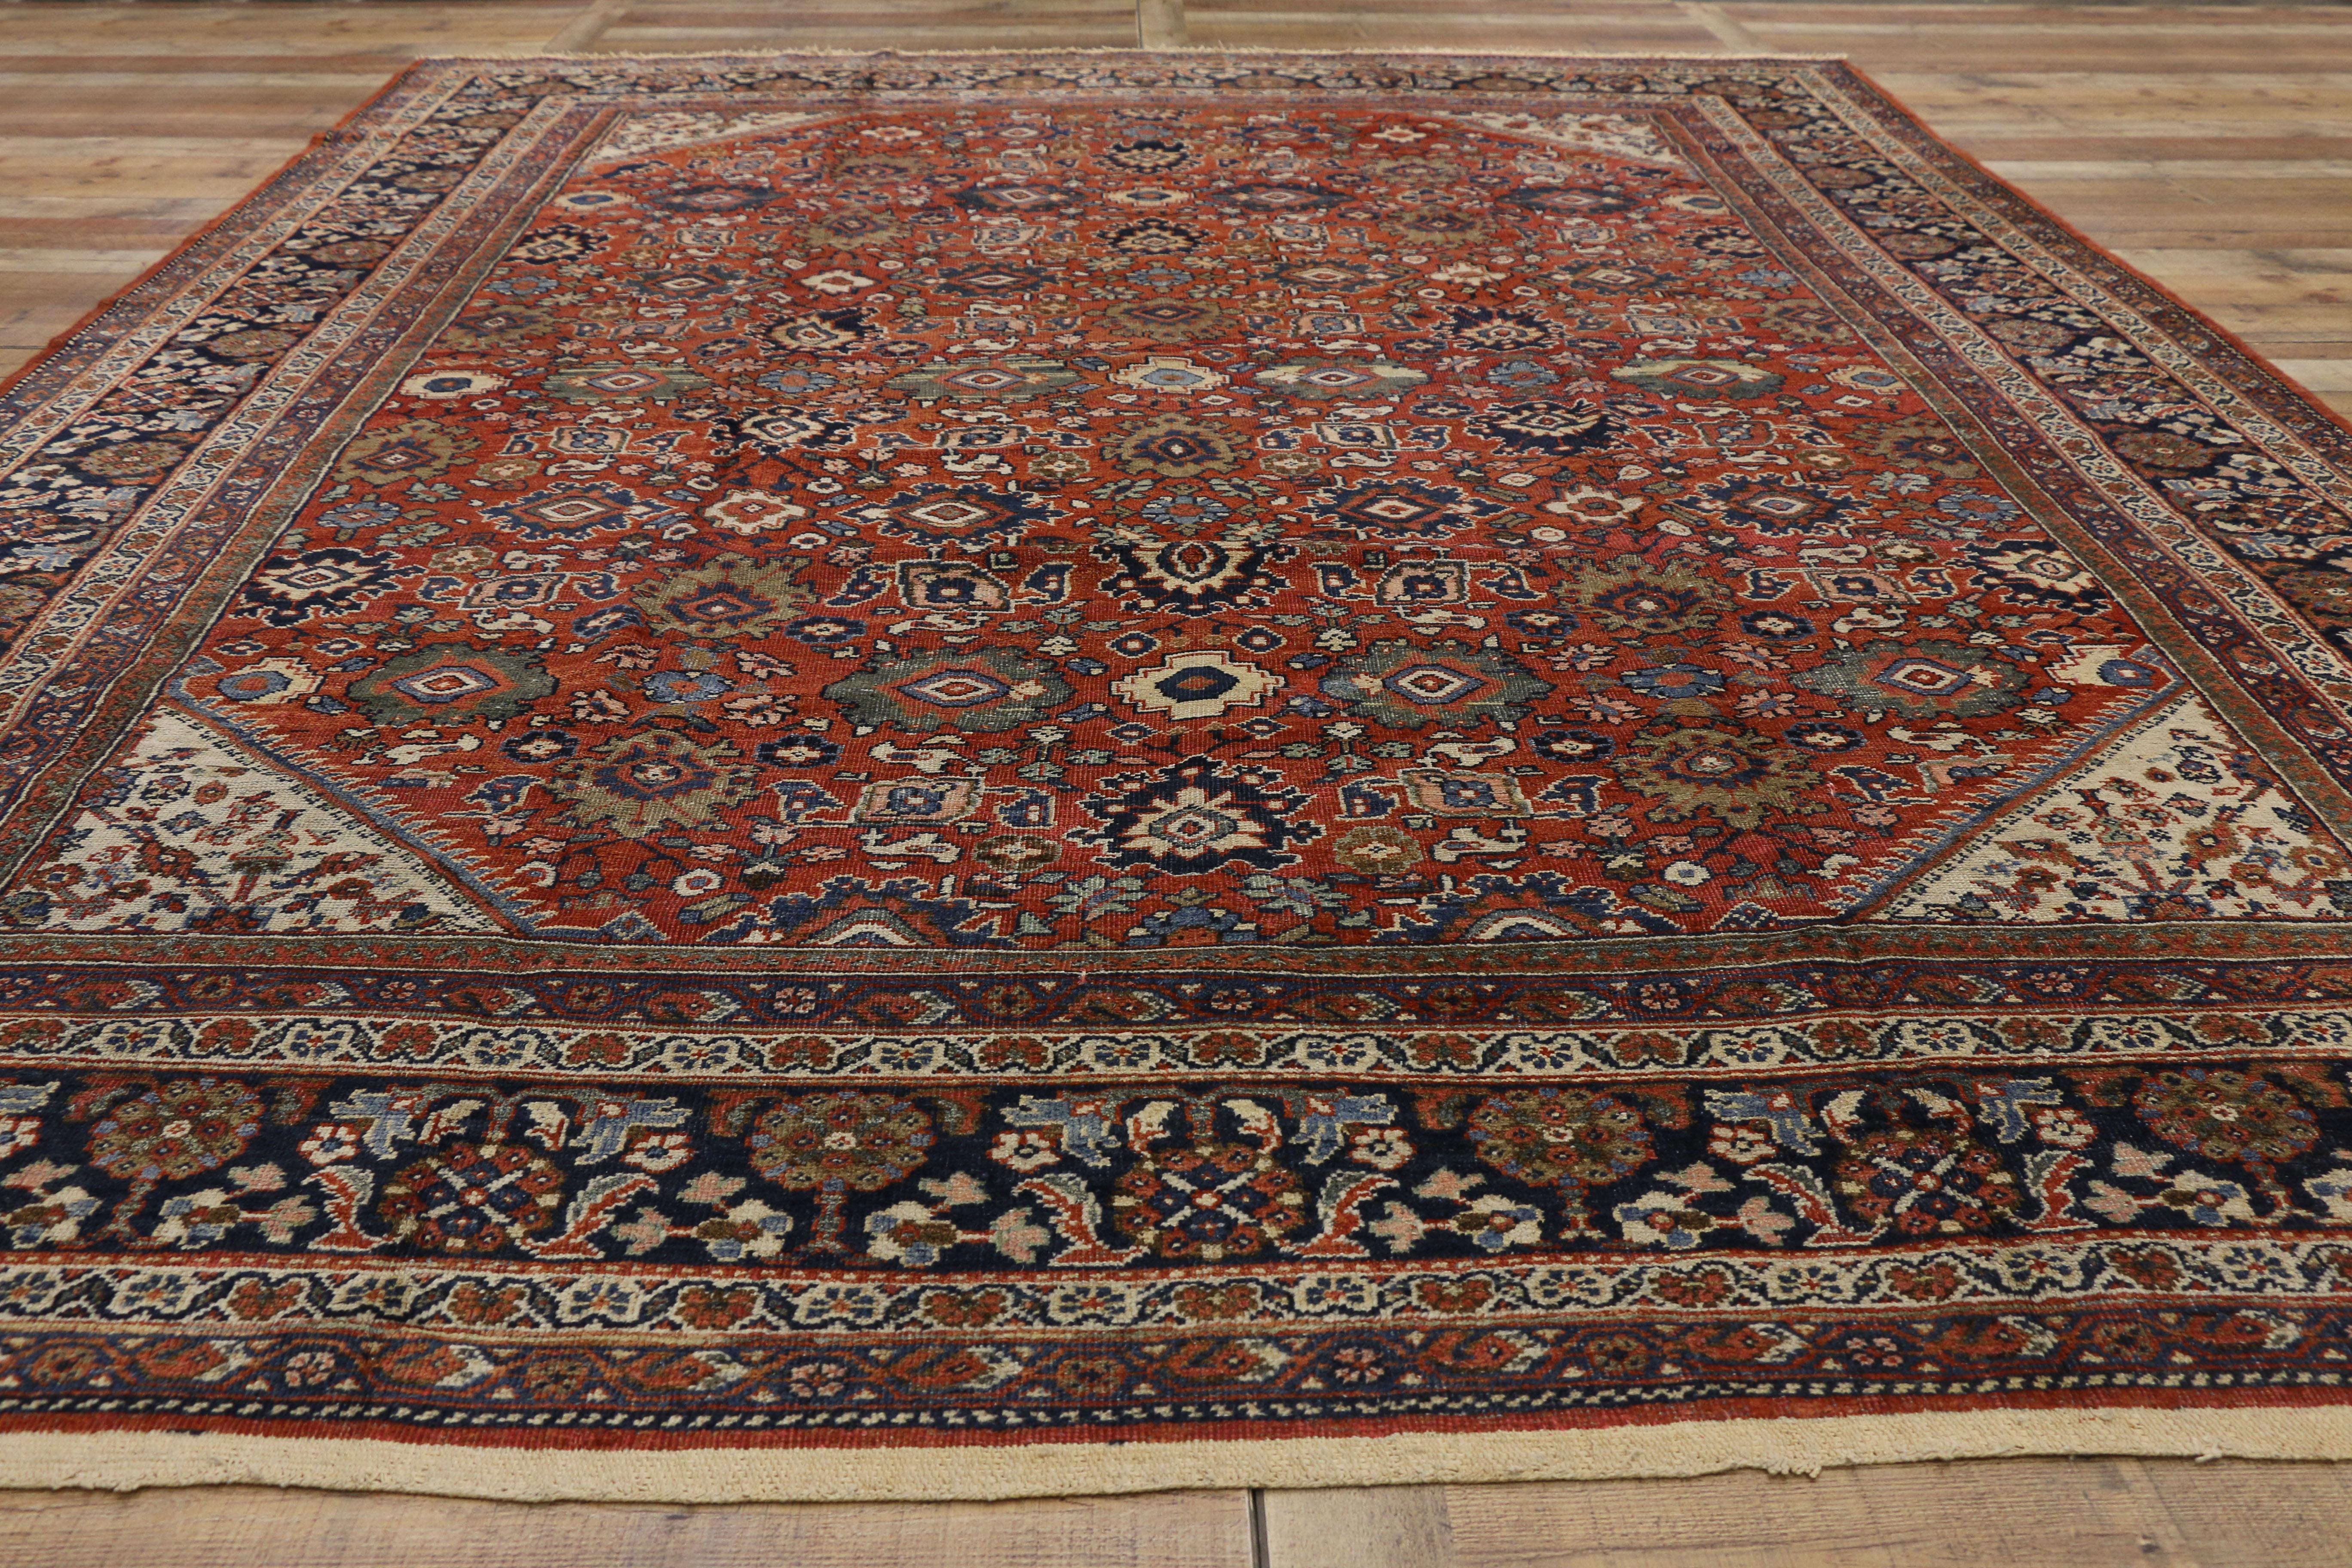 20th Century Antique Persian Mahal Area Rug with Federal and American Colonial Style